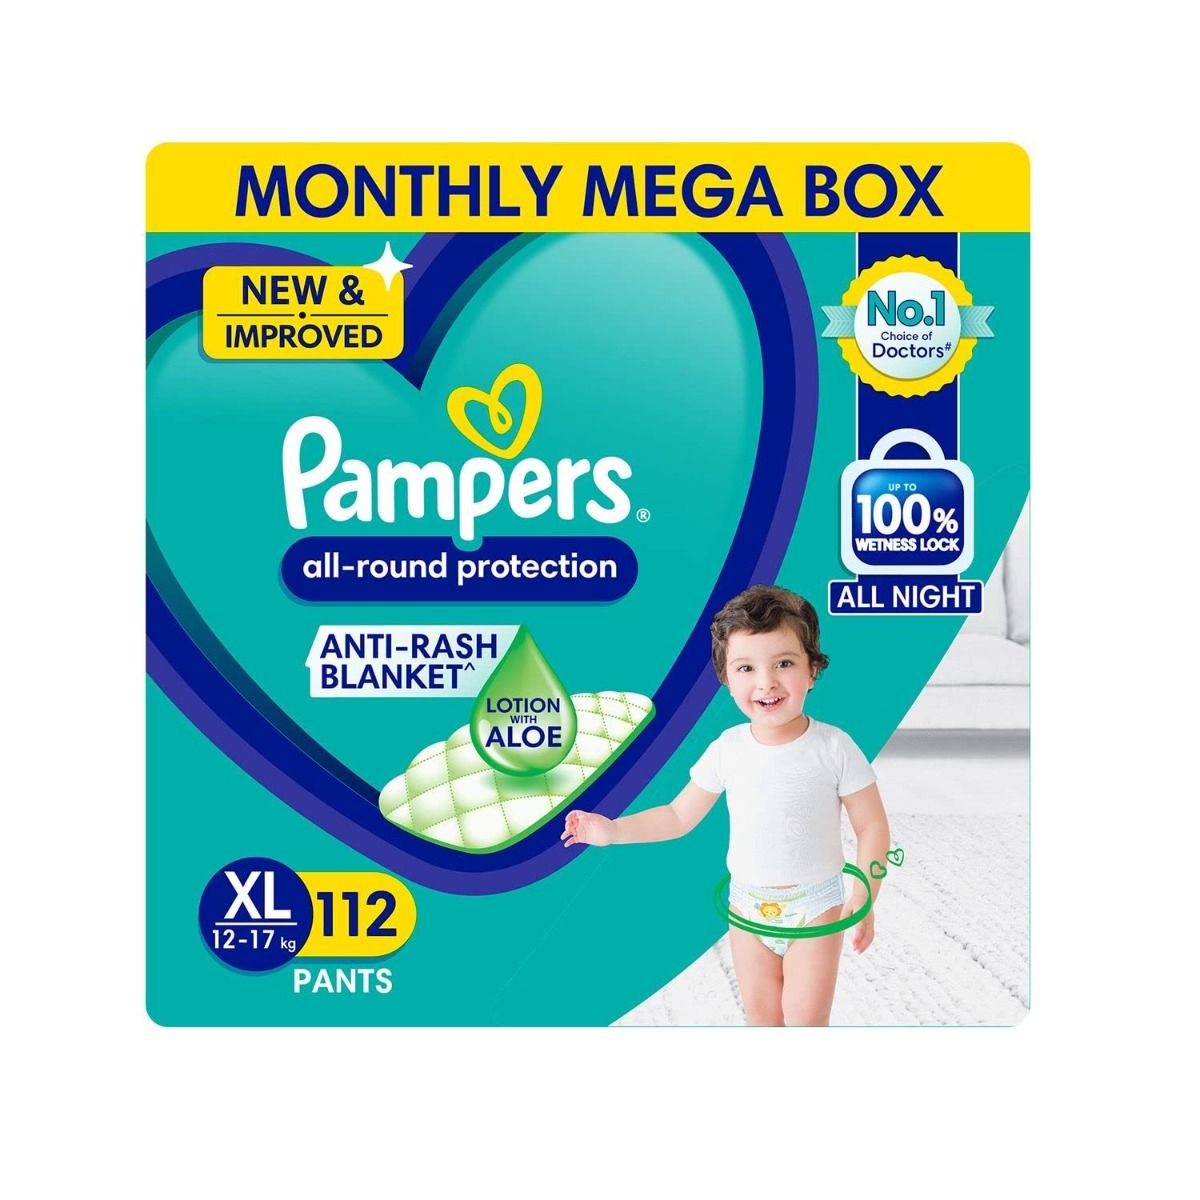 Buy Pampers All-Round Protection Diaper Pants XL, 112 Count (2 x 56 Diapers) Online